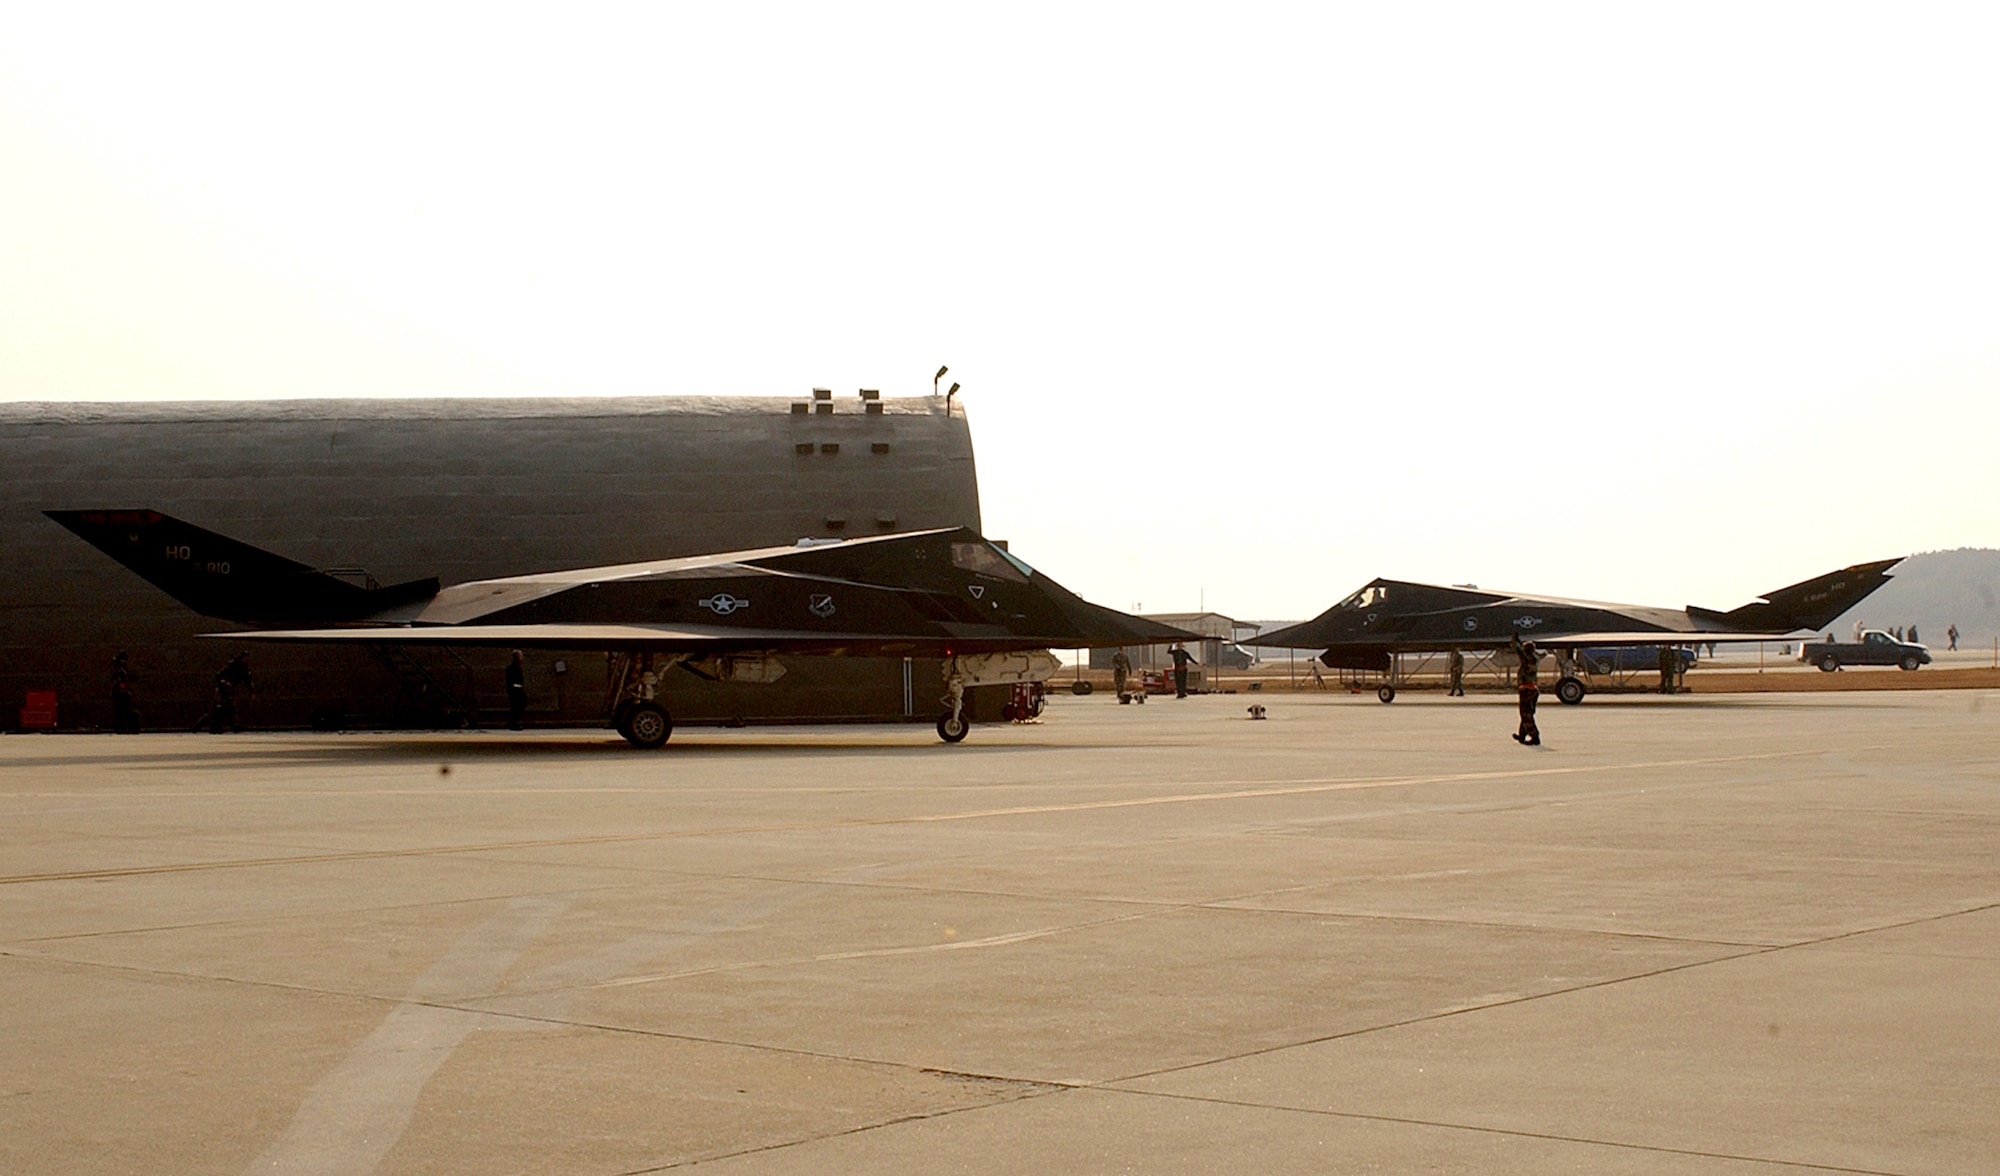 Senior Airman Jason Stanfield ushers in an F-117 Nighthawk after its arrival Jan. 11 to Kunsan Air Base, Republic of Korea. The aircraft, together with 300 Airmen, deployed here from Holloman Air Force Base, N.M., as part of a routine Air Expeditionary Force rotation. The aircraft, assigned to the 9th Expeditionary Fighter Squadron, is part of the third squadron of Kunsan AB's host unit, the 8th Fighter Wing, during the deployment's duration. Airman Stanfield is an F-117 crew chief. (U.S. Air Force photo/Senior Airman Darnell Cannady)